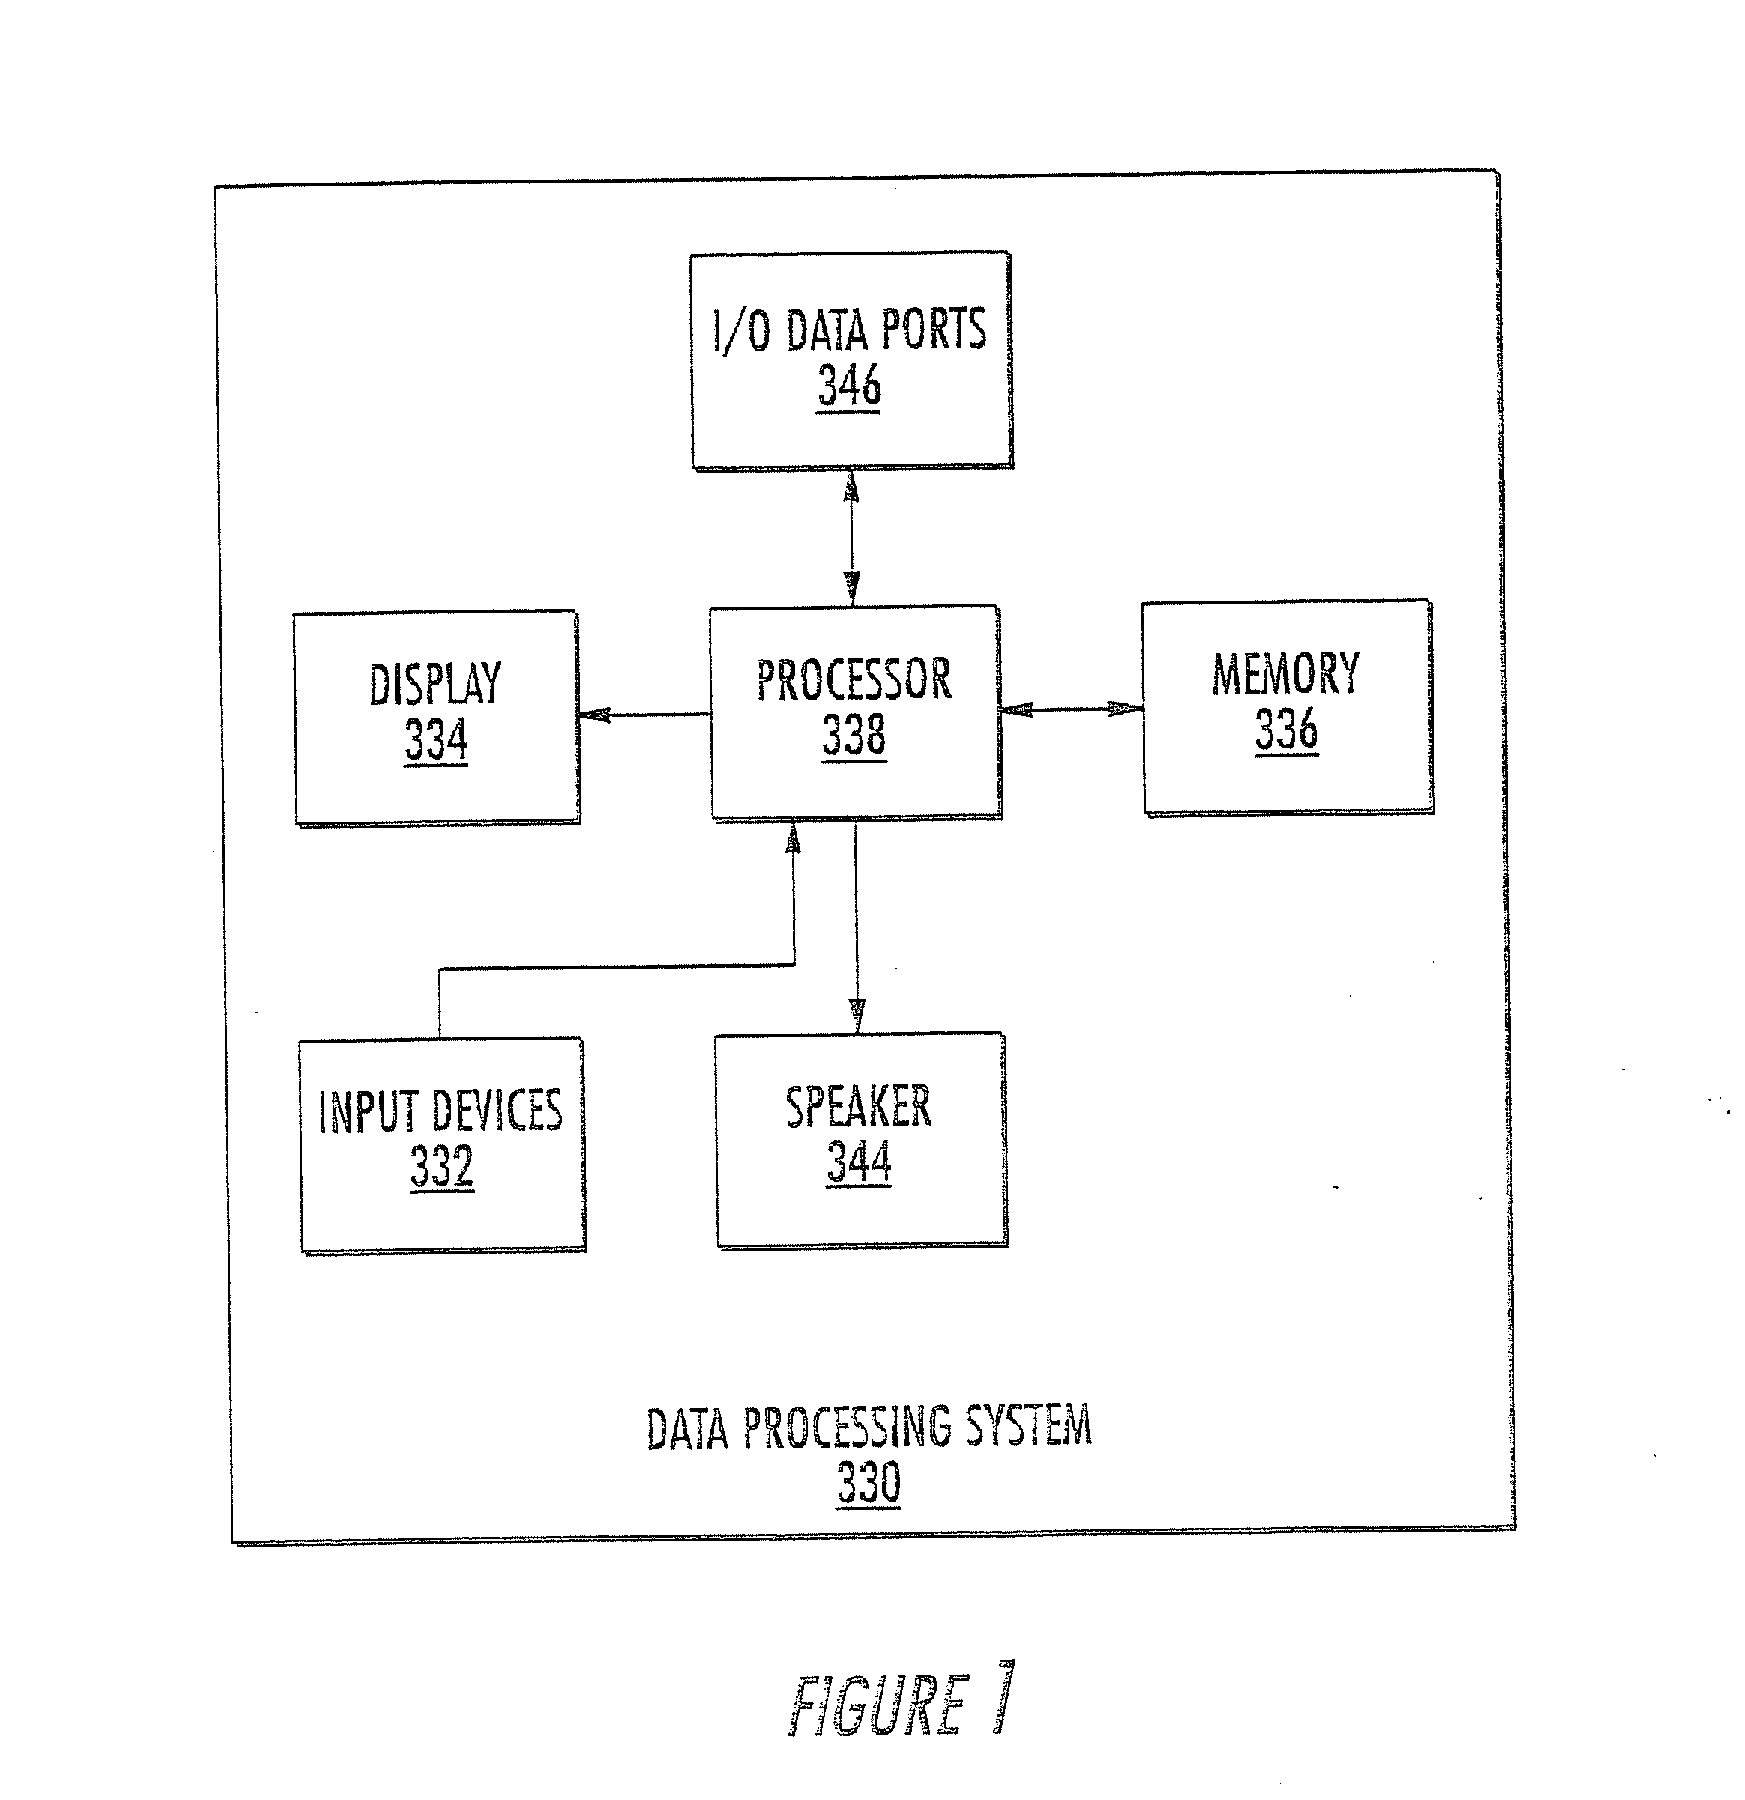 Methods, Systems and Computer Program Products for Controlling Tree Diagram Graphical User Interfaces and/or For Partially Collapsing Tree Diagrams